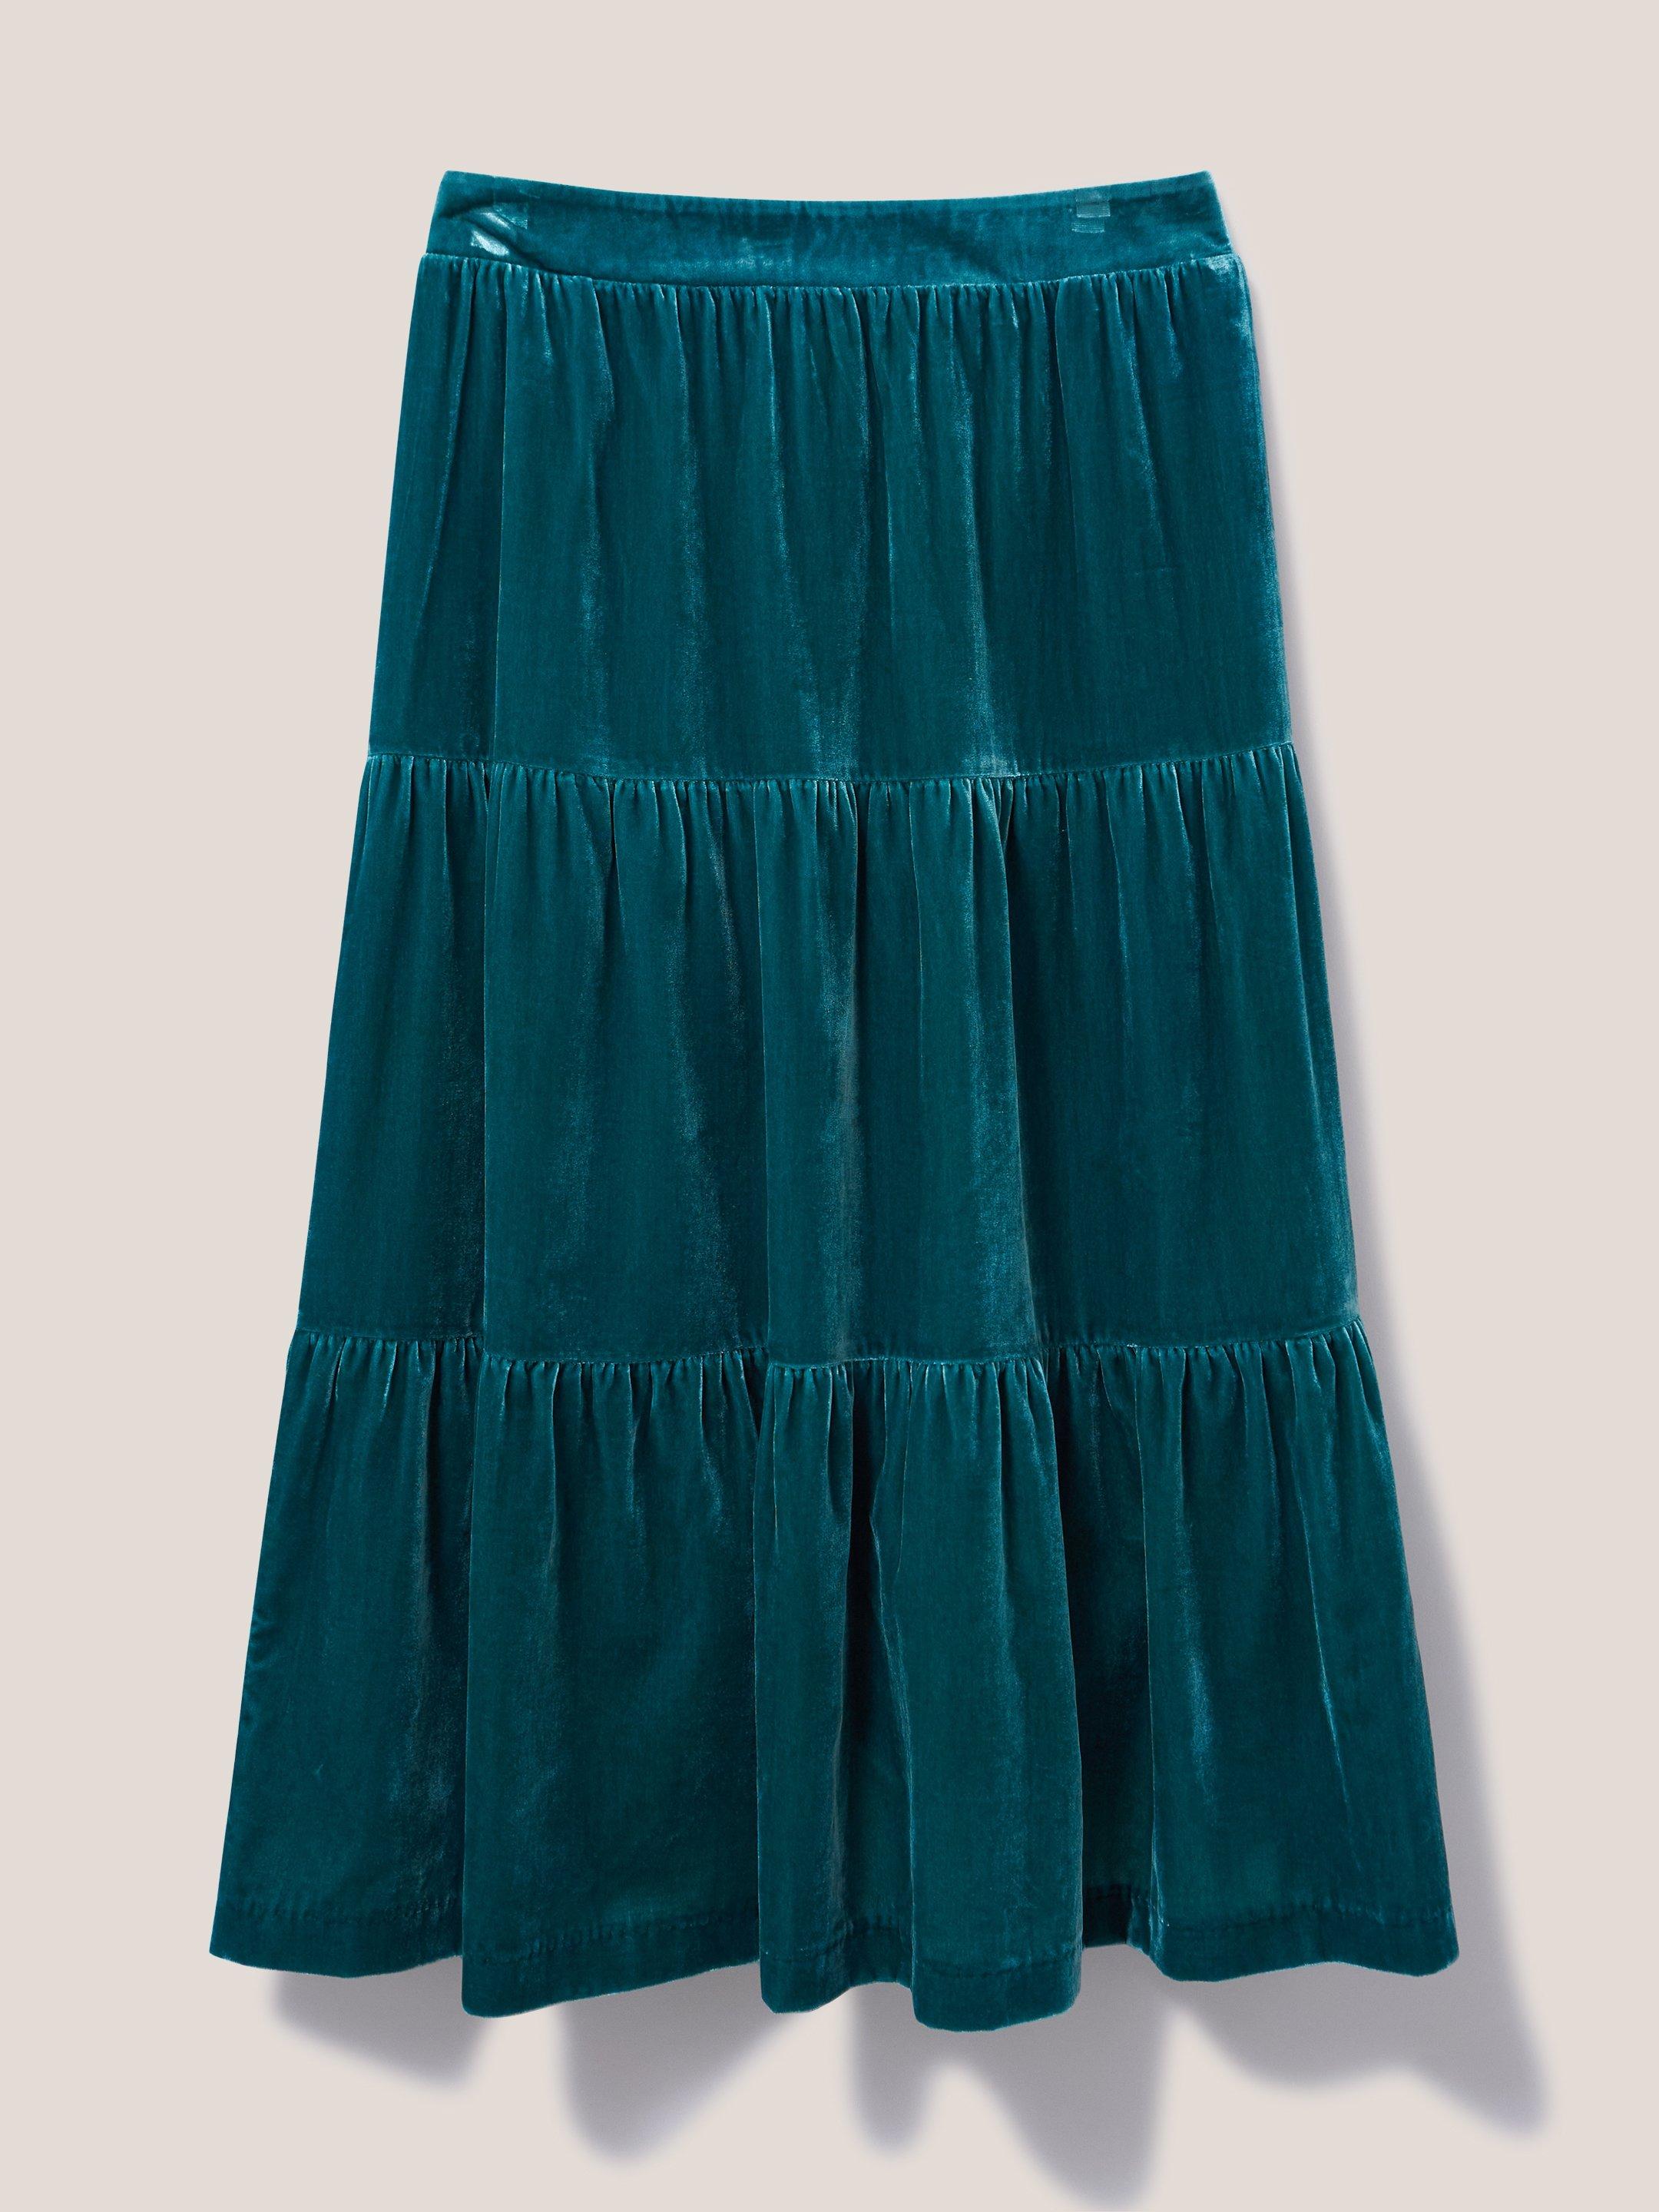 Mia Velvet Tiered Skirt in MID TEAL - FLAT FRONT